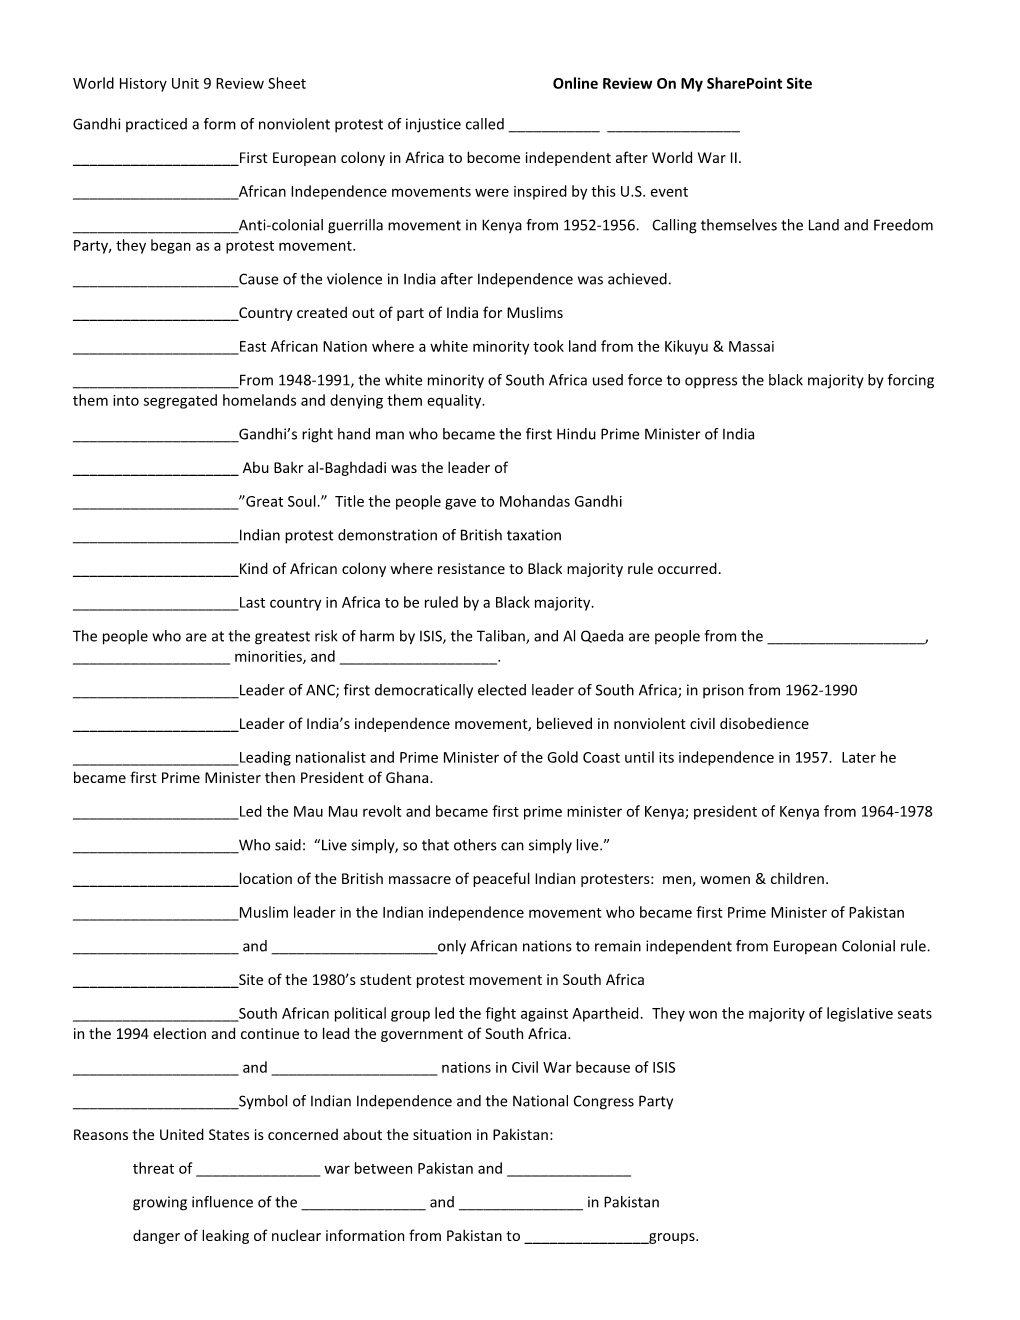 World History Unit 9 Review Sheet Online Review on My Sharepoint Site